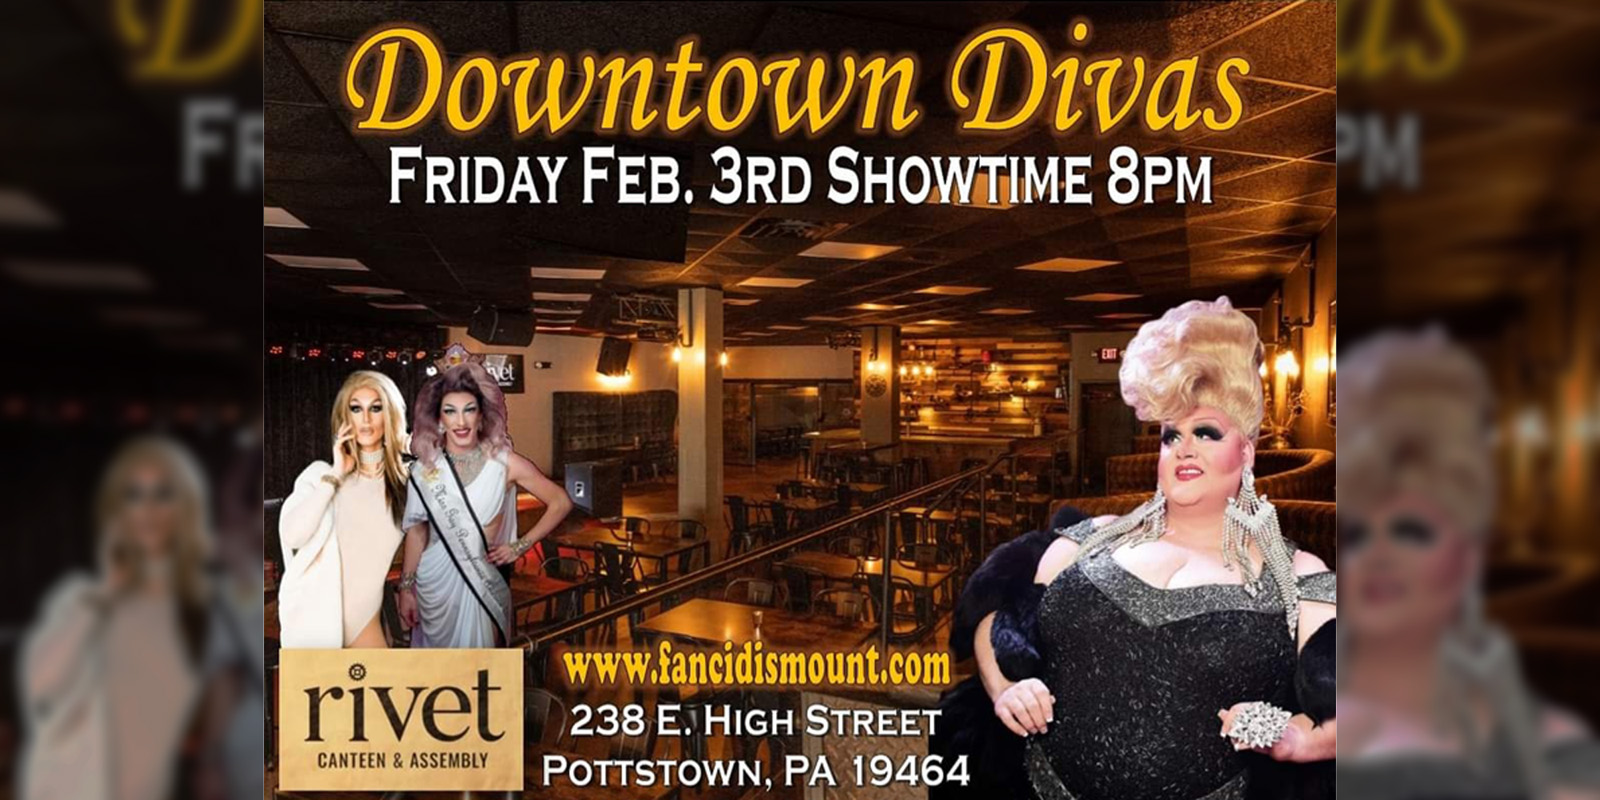 Downtown Diva's Drag Show - Live at Rivet: Canteen & Assembly on Friday, February 3rd, 2023! Join Fanci and her girls for the hottest new Drag Show in downtown Pottstown!